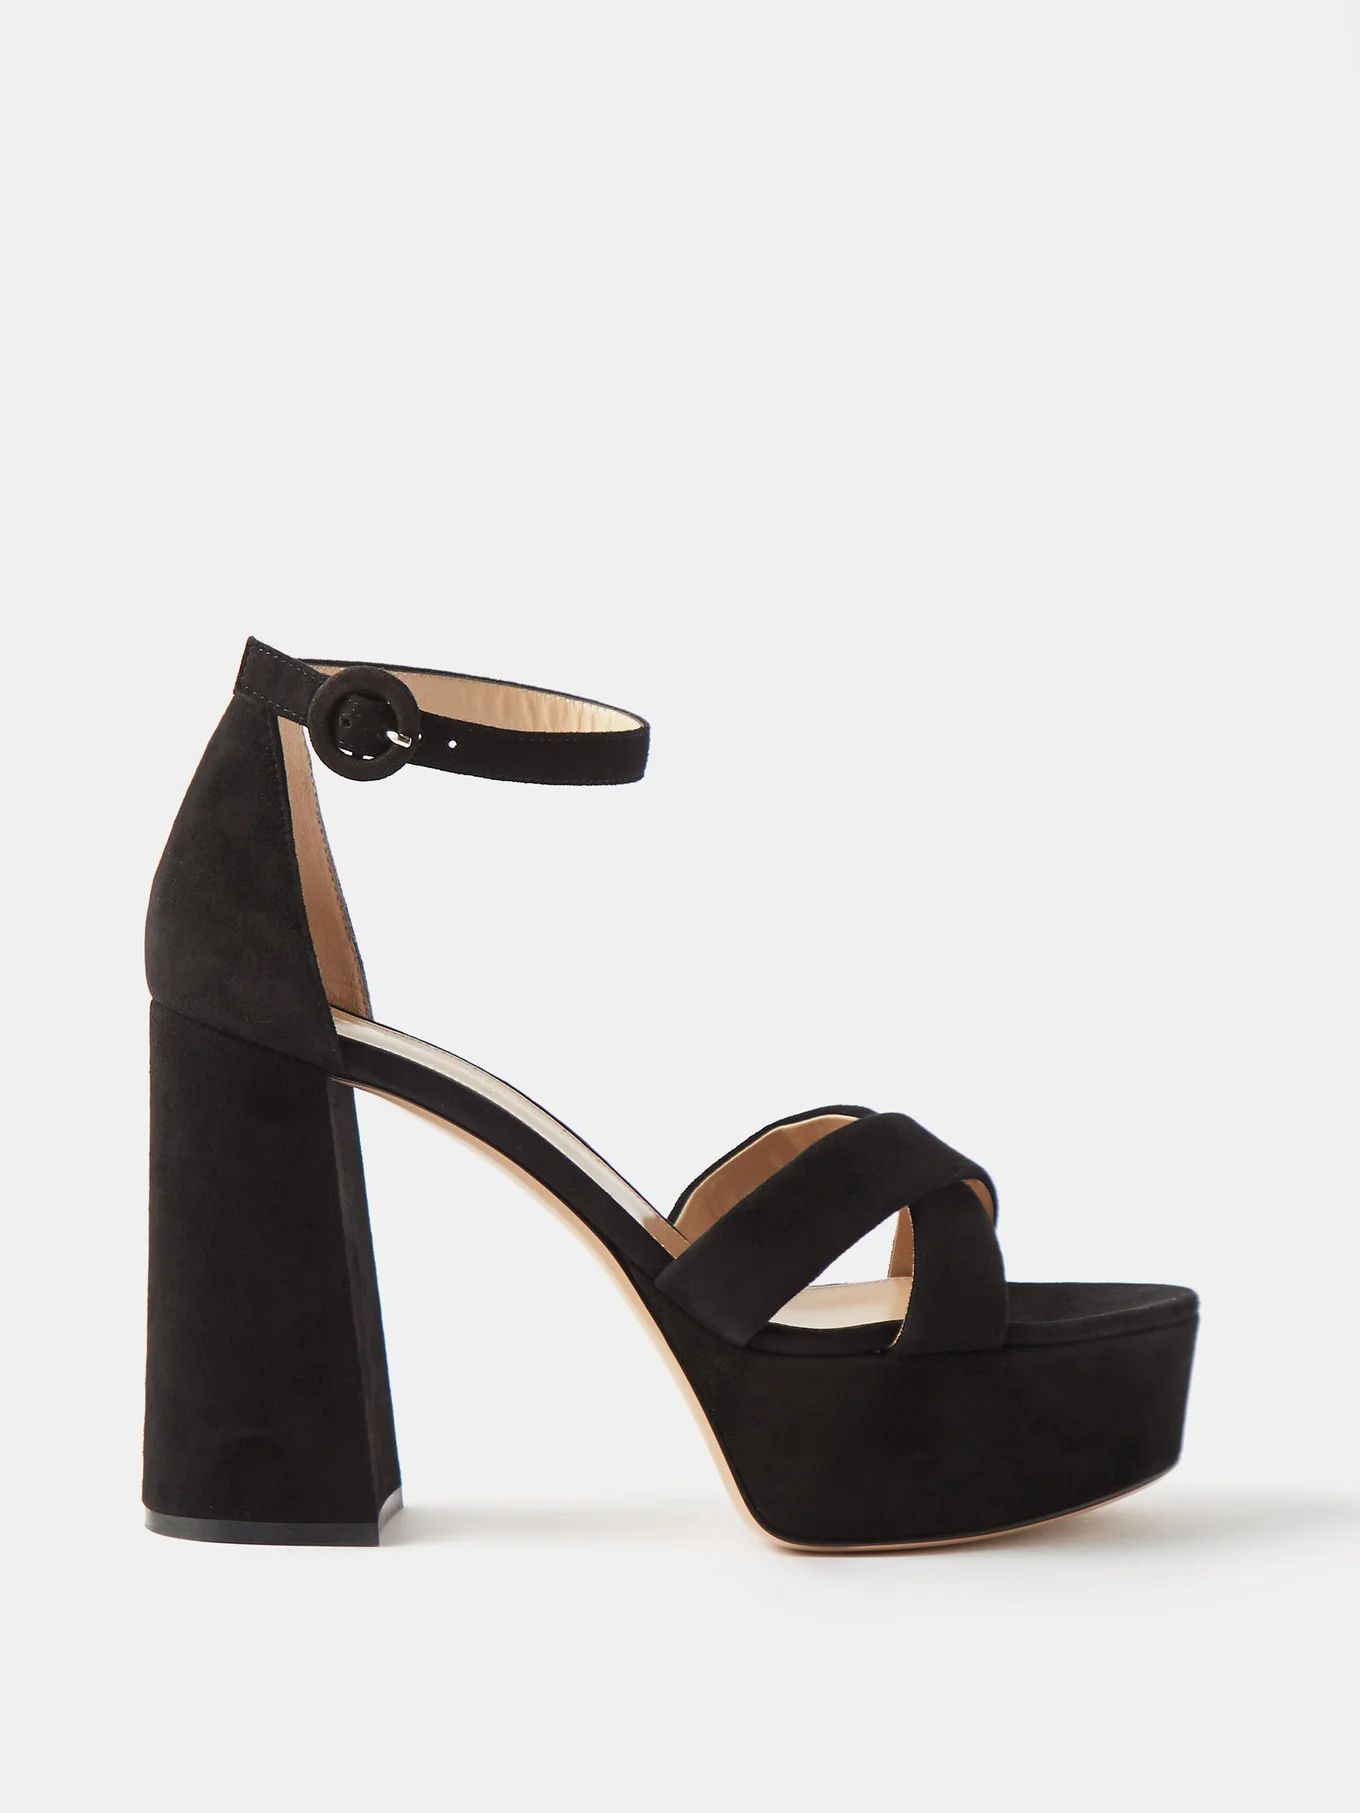 Sheridan 70 suede platform sandals | Gianvito Rossi | Matches (US)